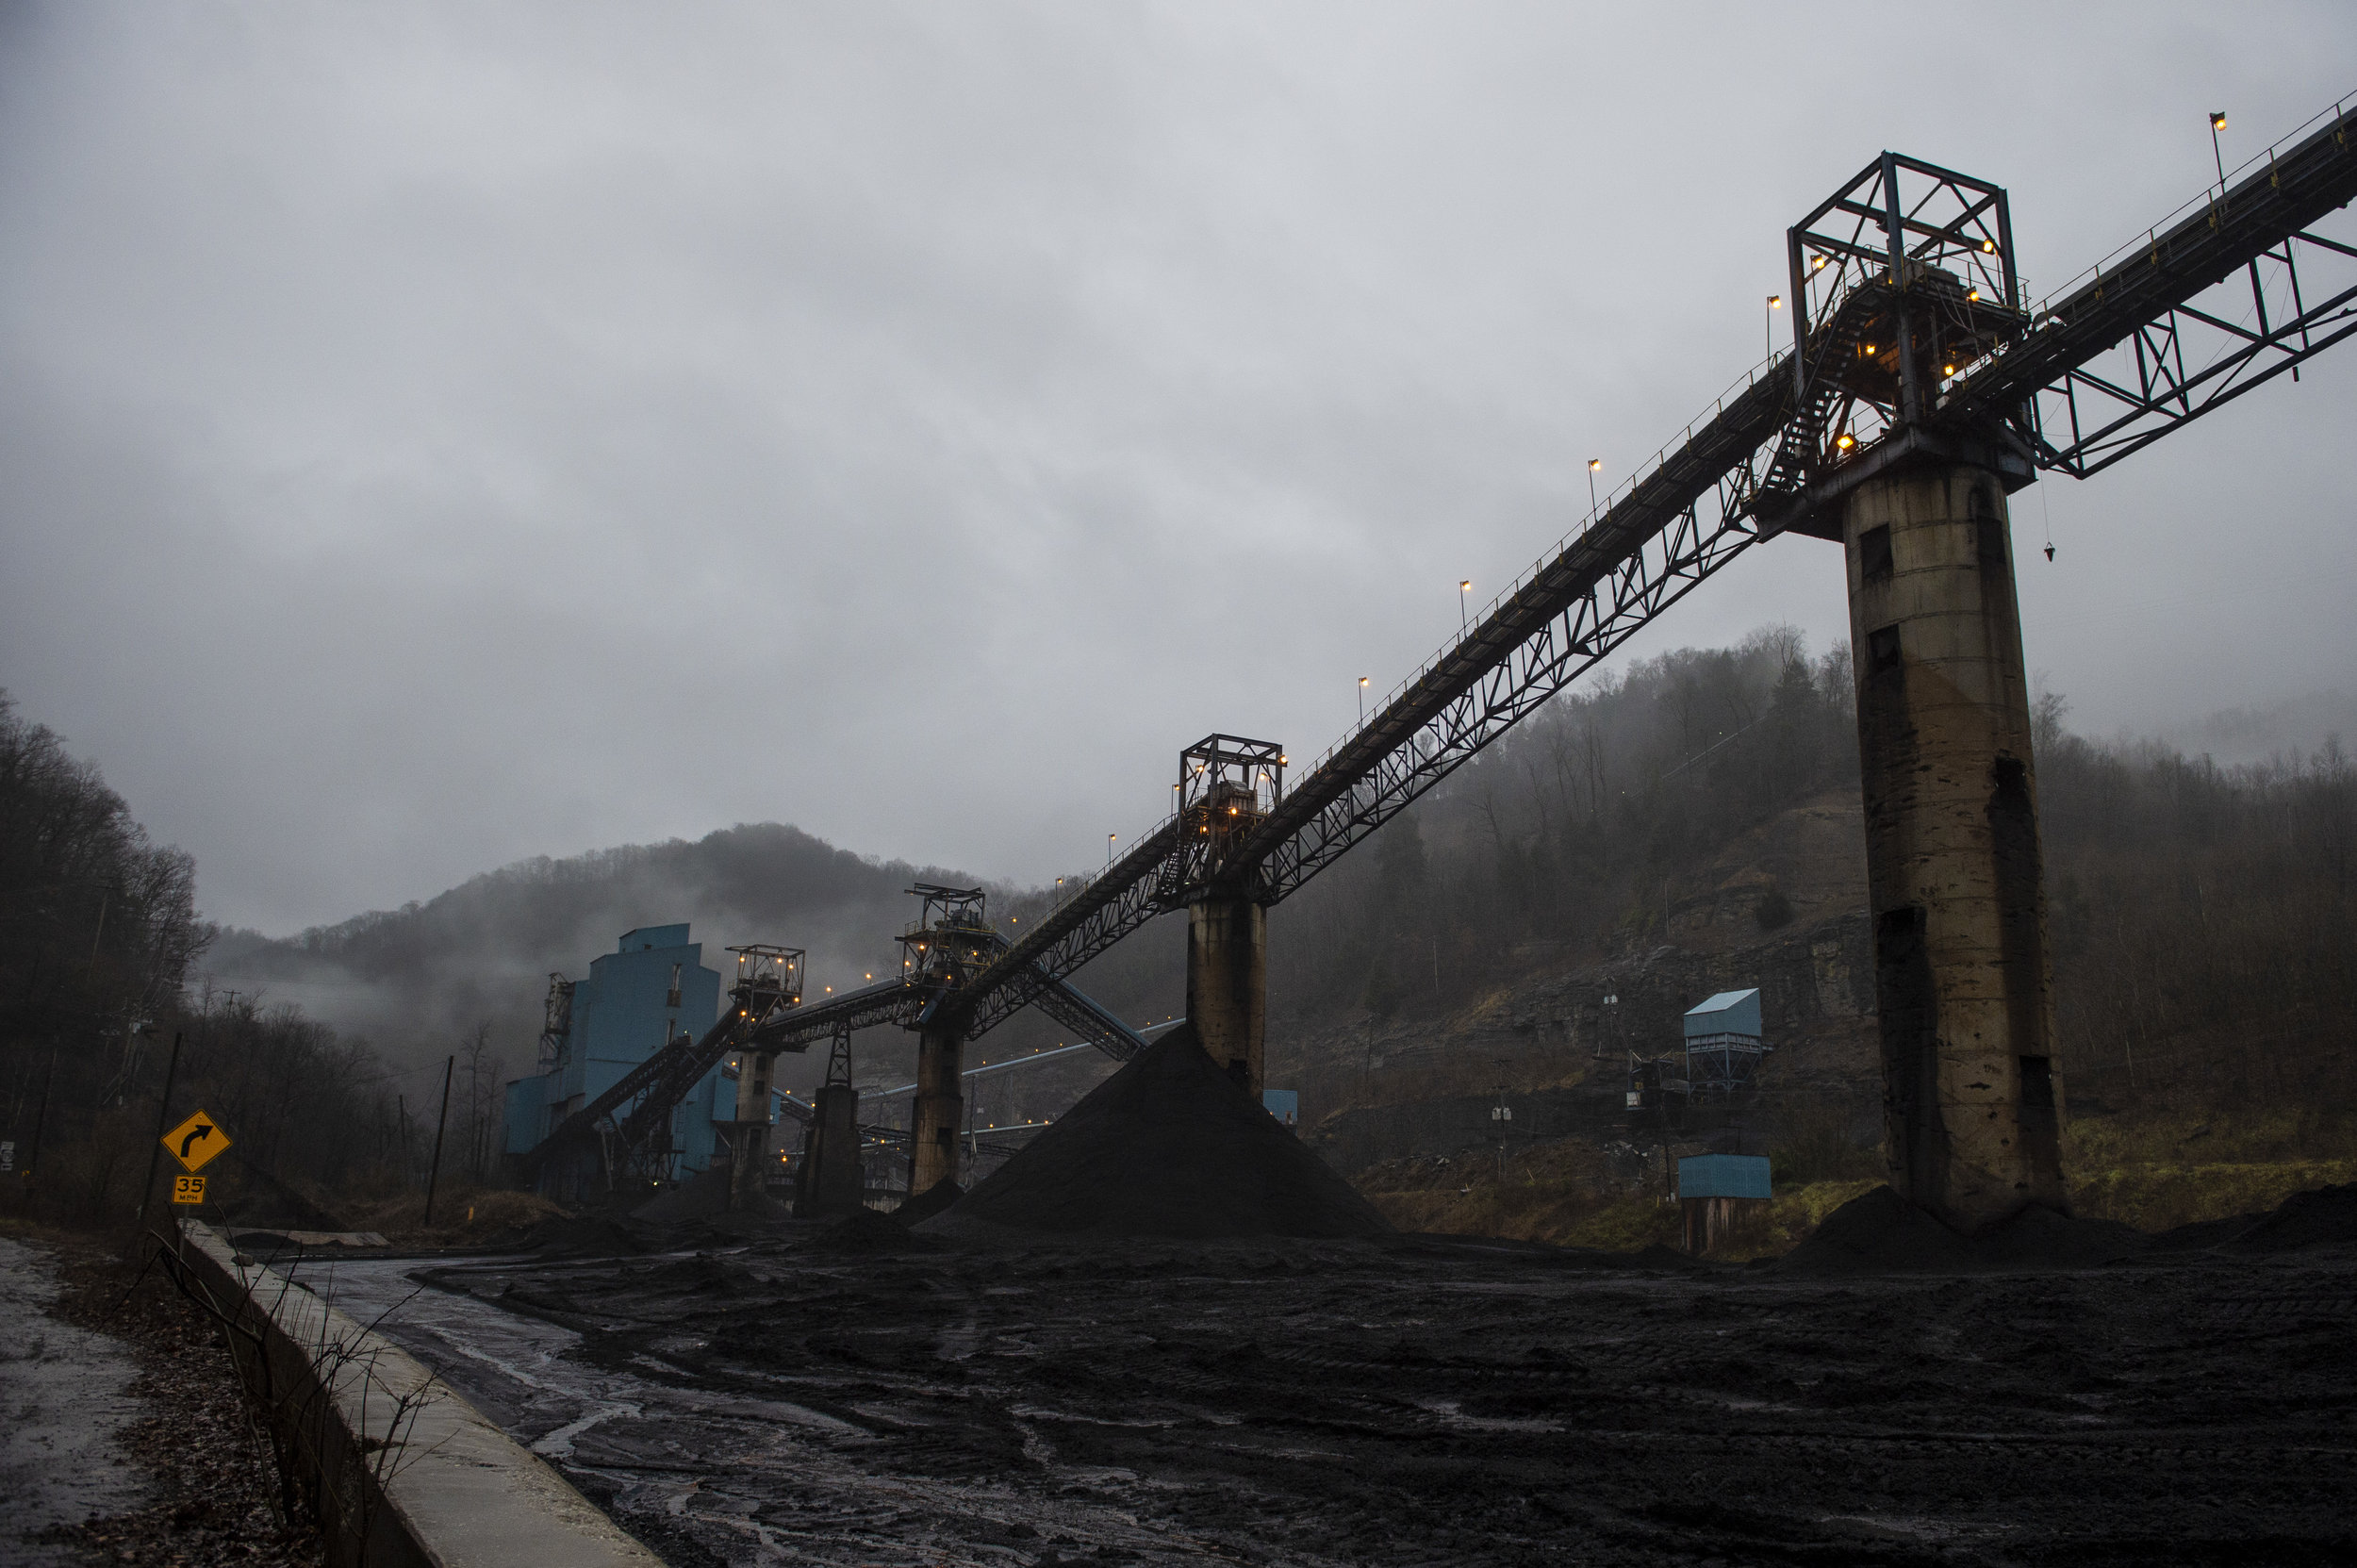  Rain or snow, fog or ice, a coal processing plant along Kentucky Highway 194 continues to operate on Friday, January 17. 